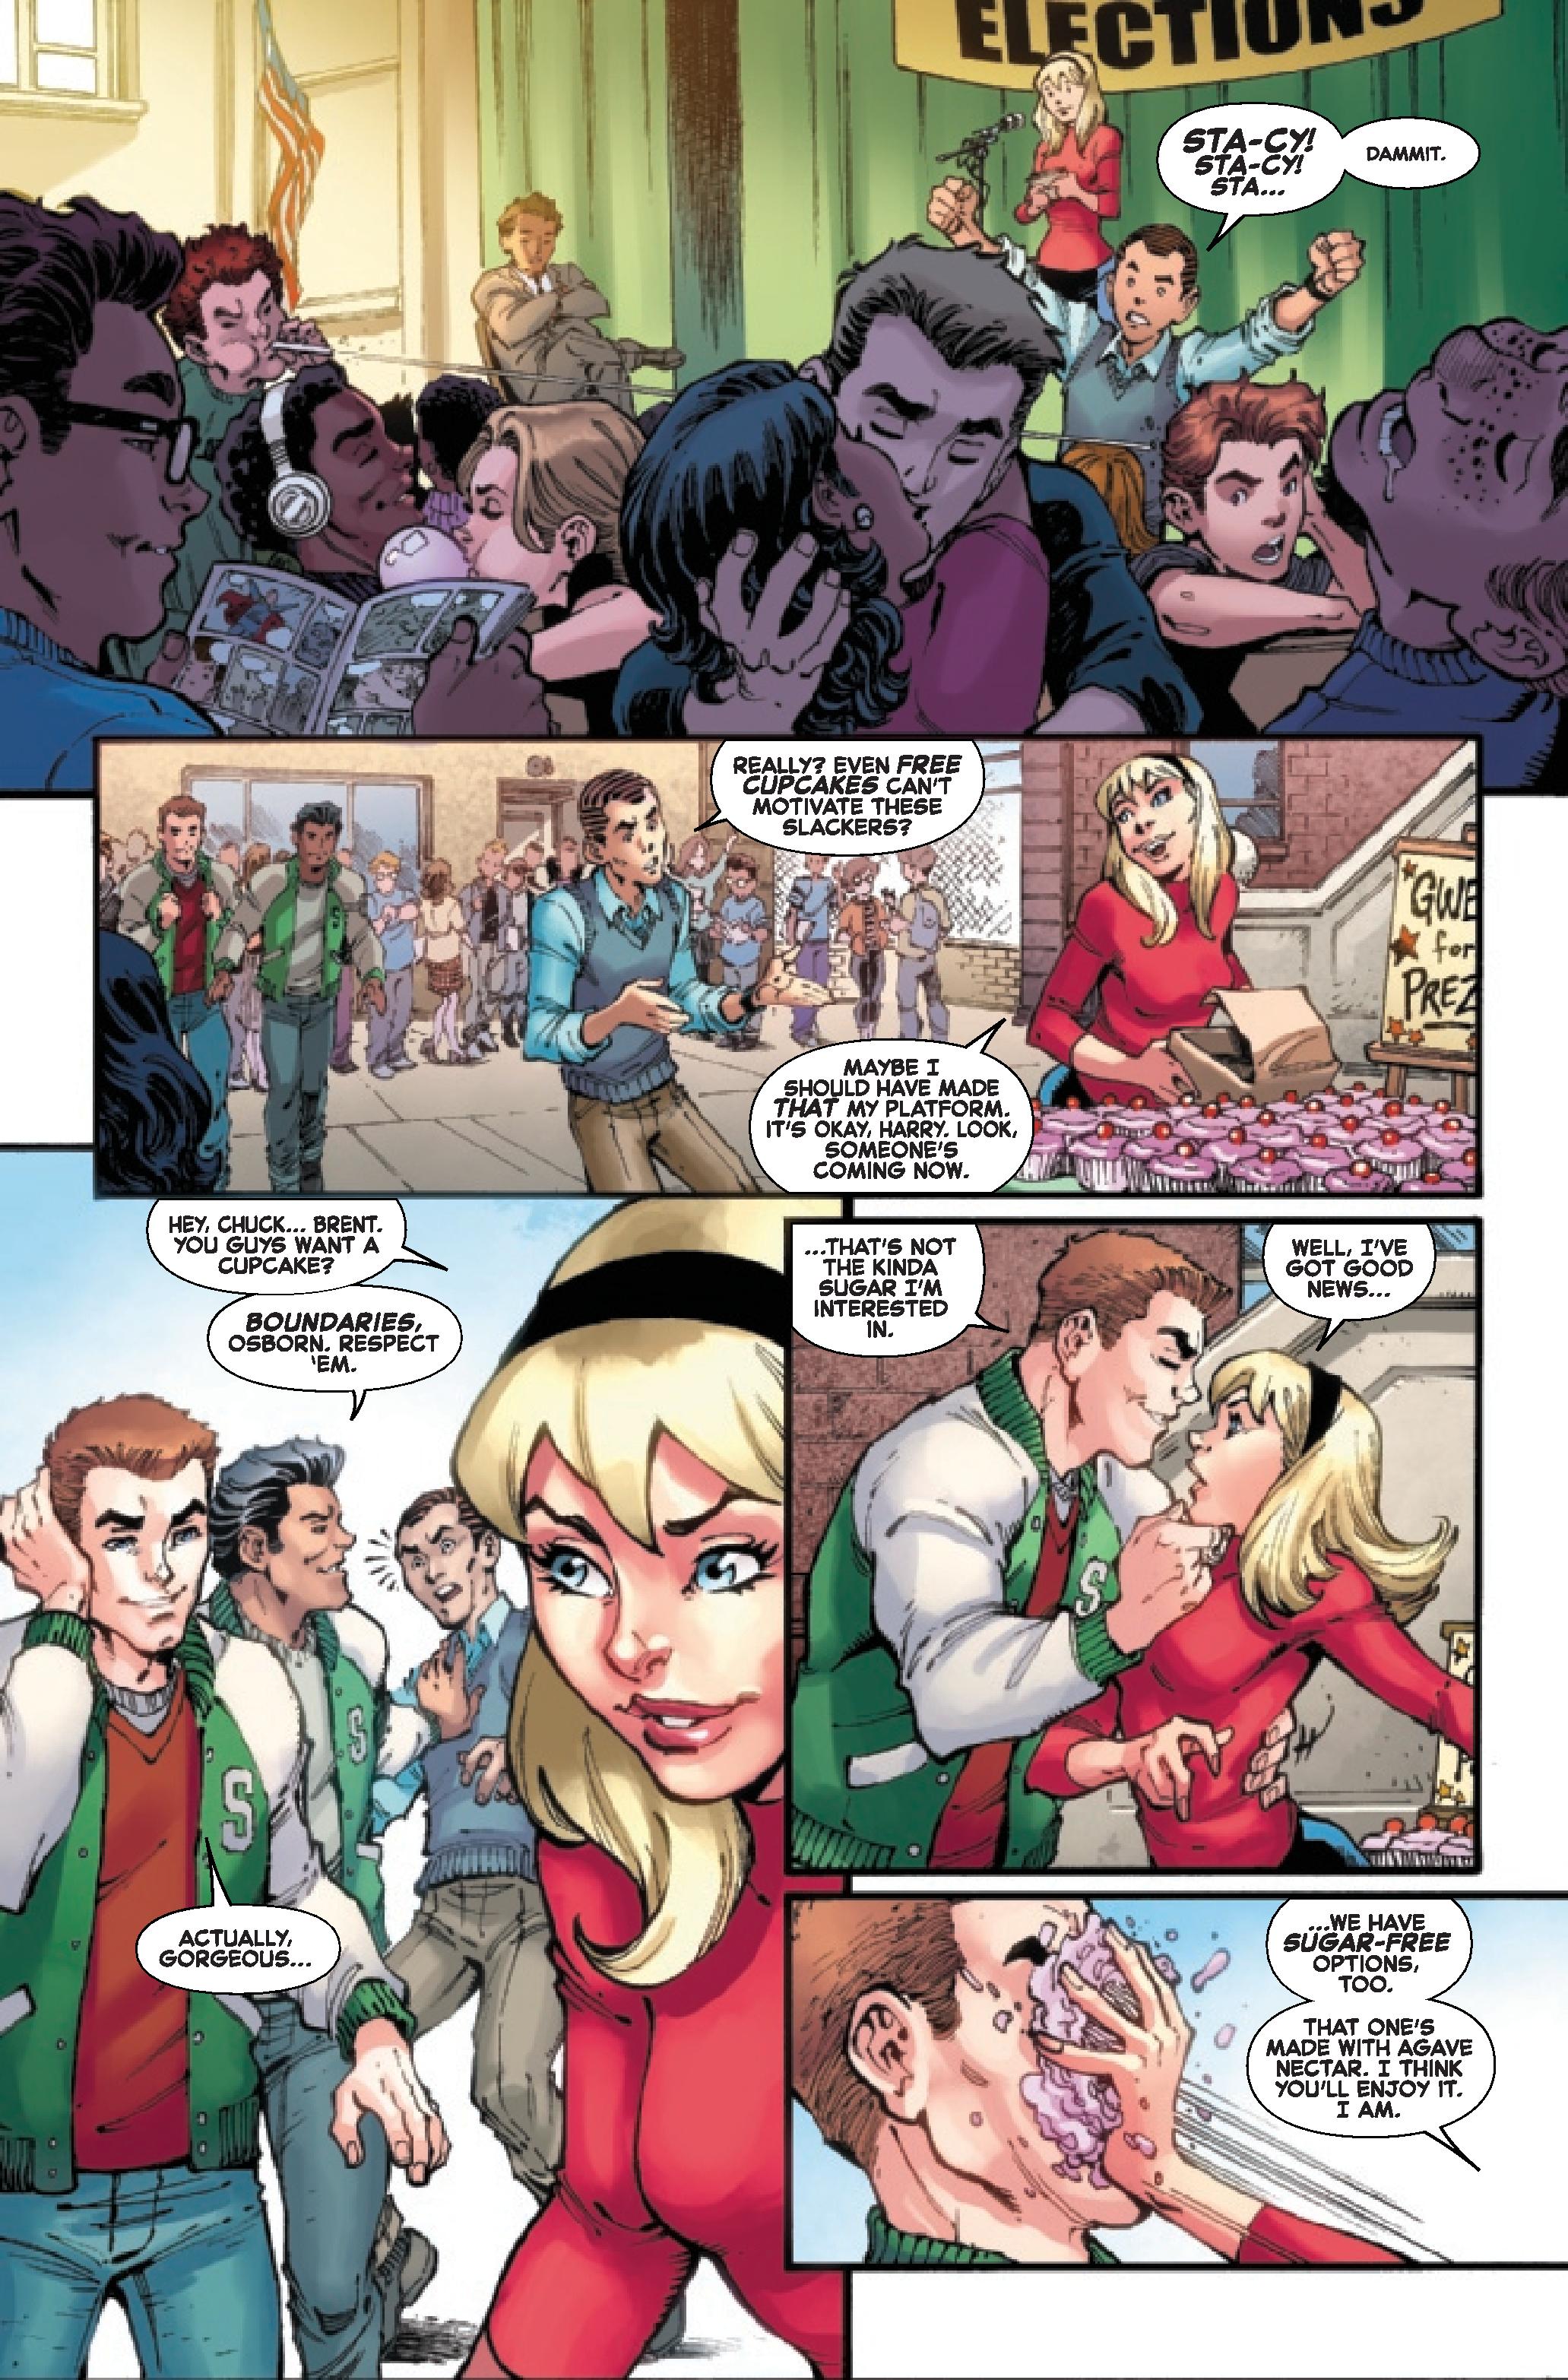 Gwen Stacy #1 (Of 5)